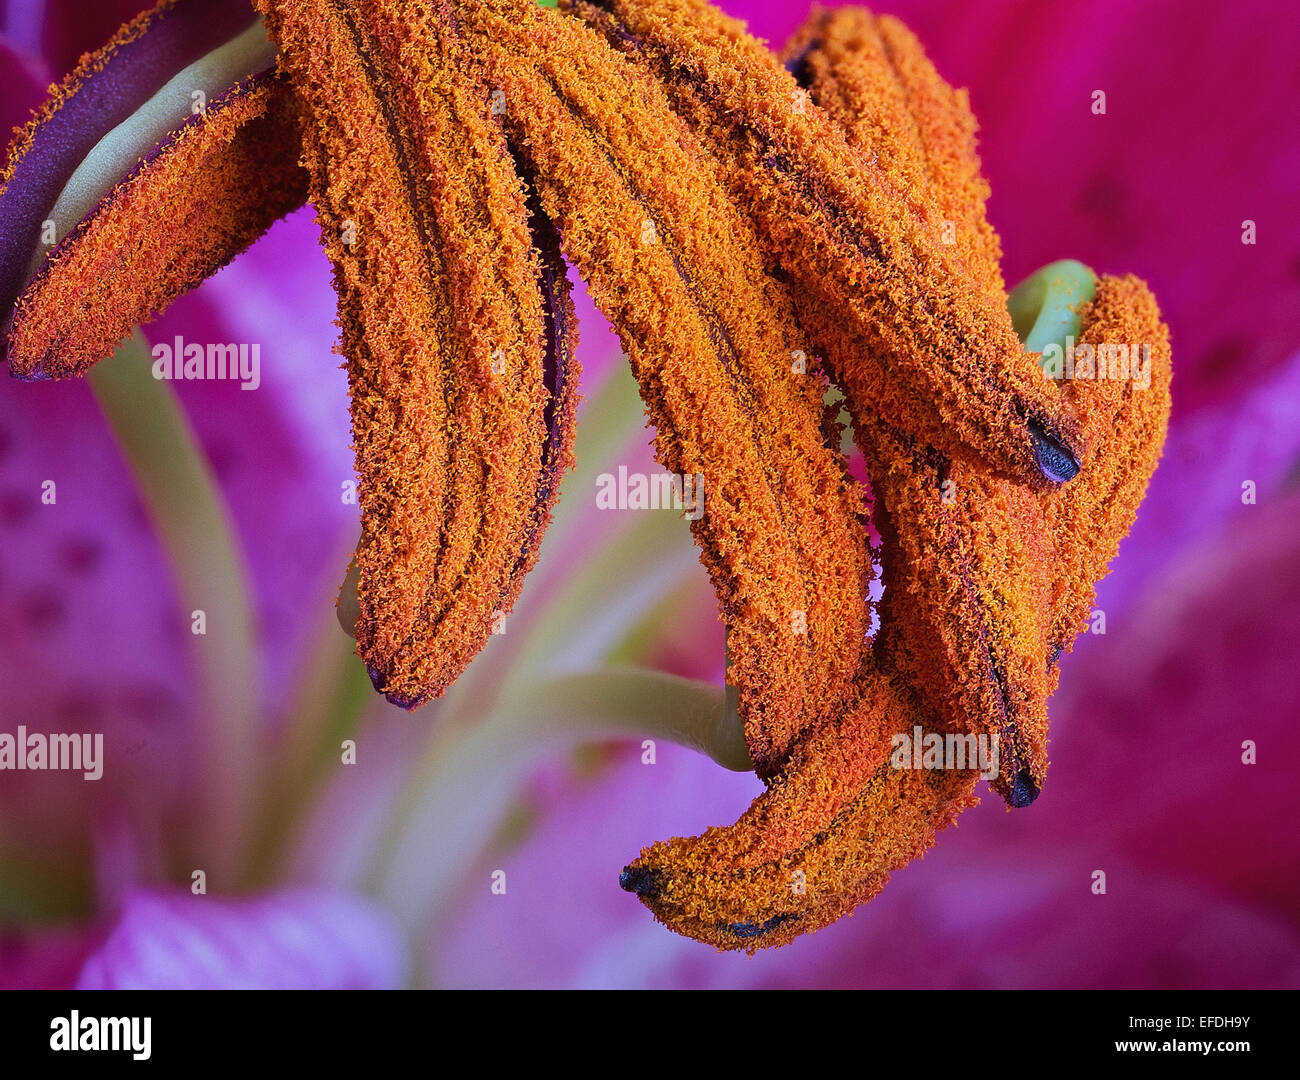 Ultra close up of stamens of a pink lily flower showing individual pollen grains Stock Photo